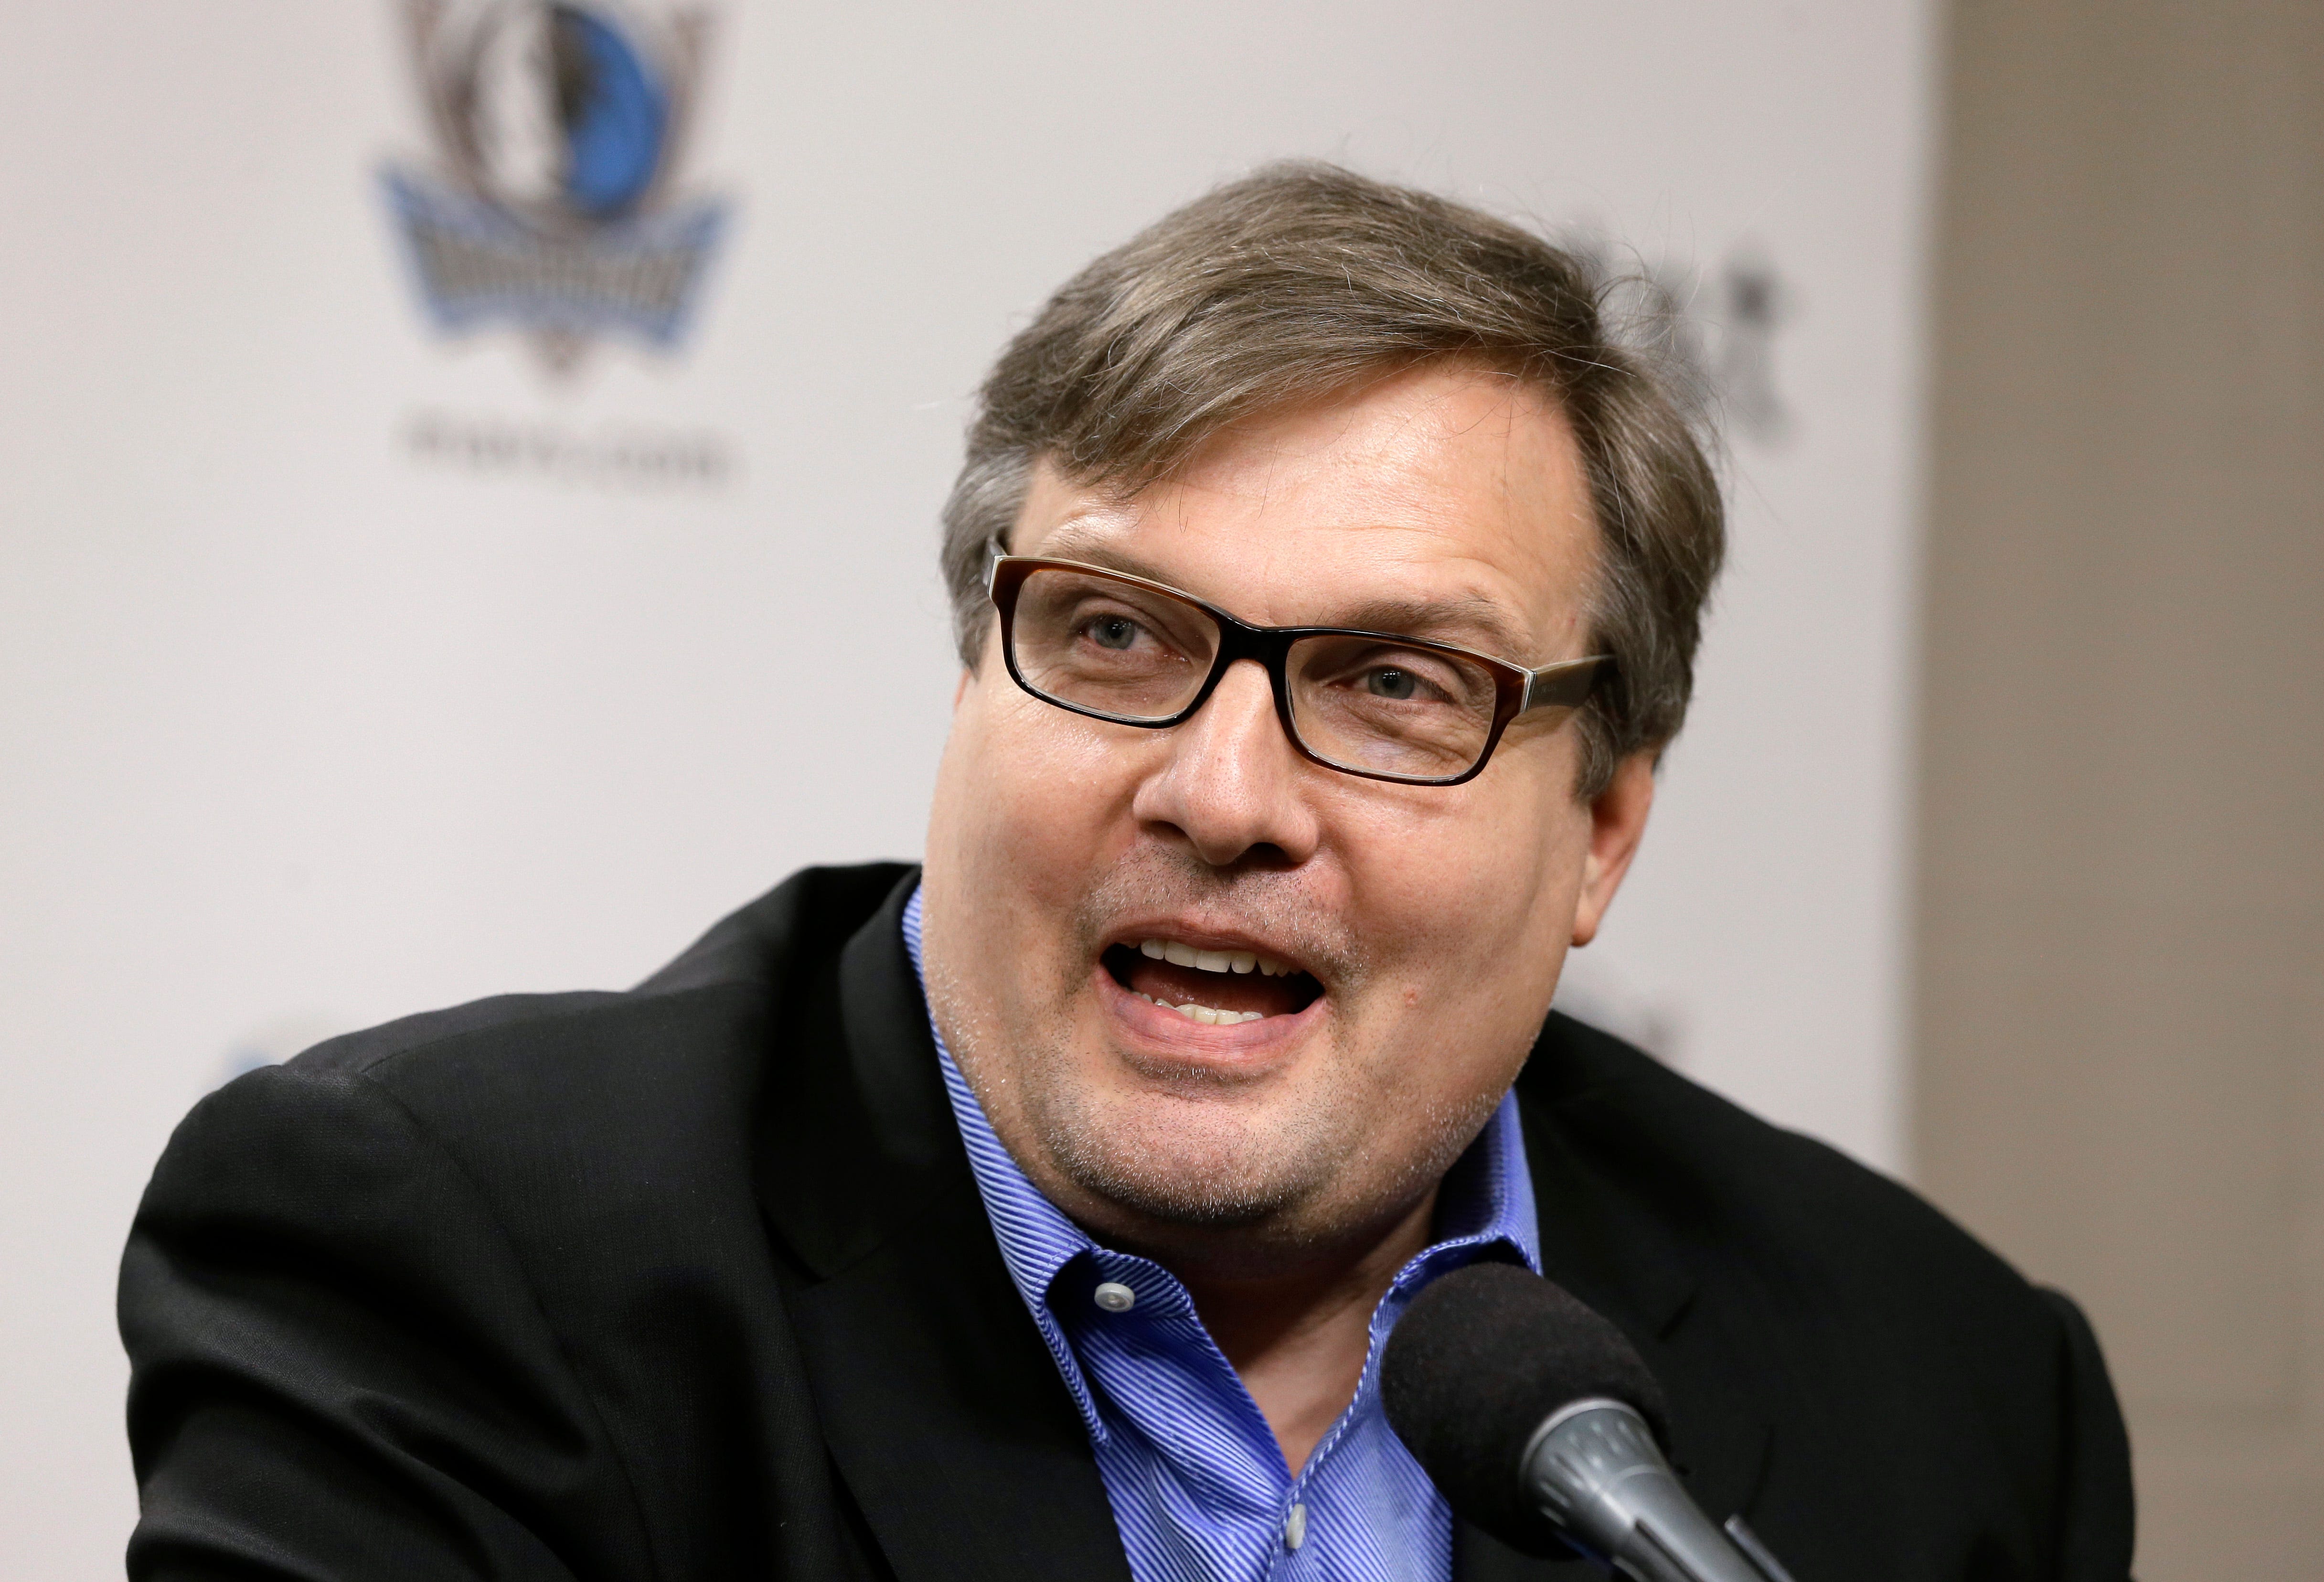 Dallas Mavericks part ways with long-time president of basketball operations Donnie Nelson